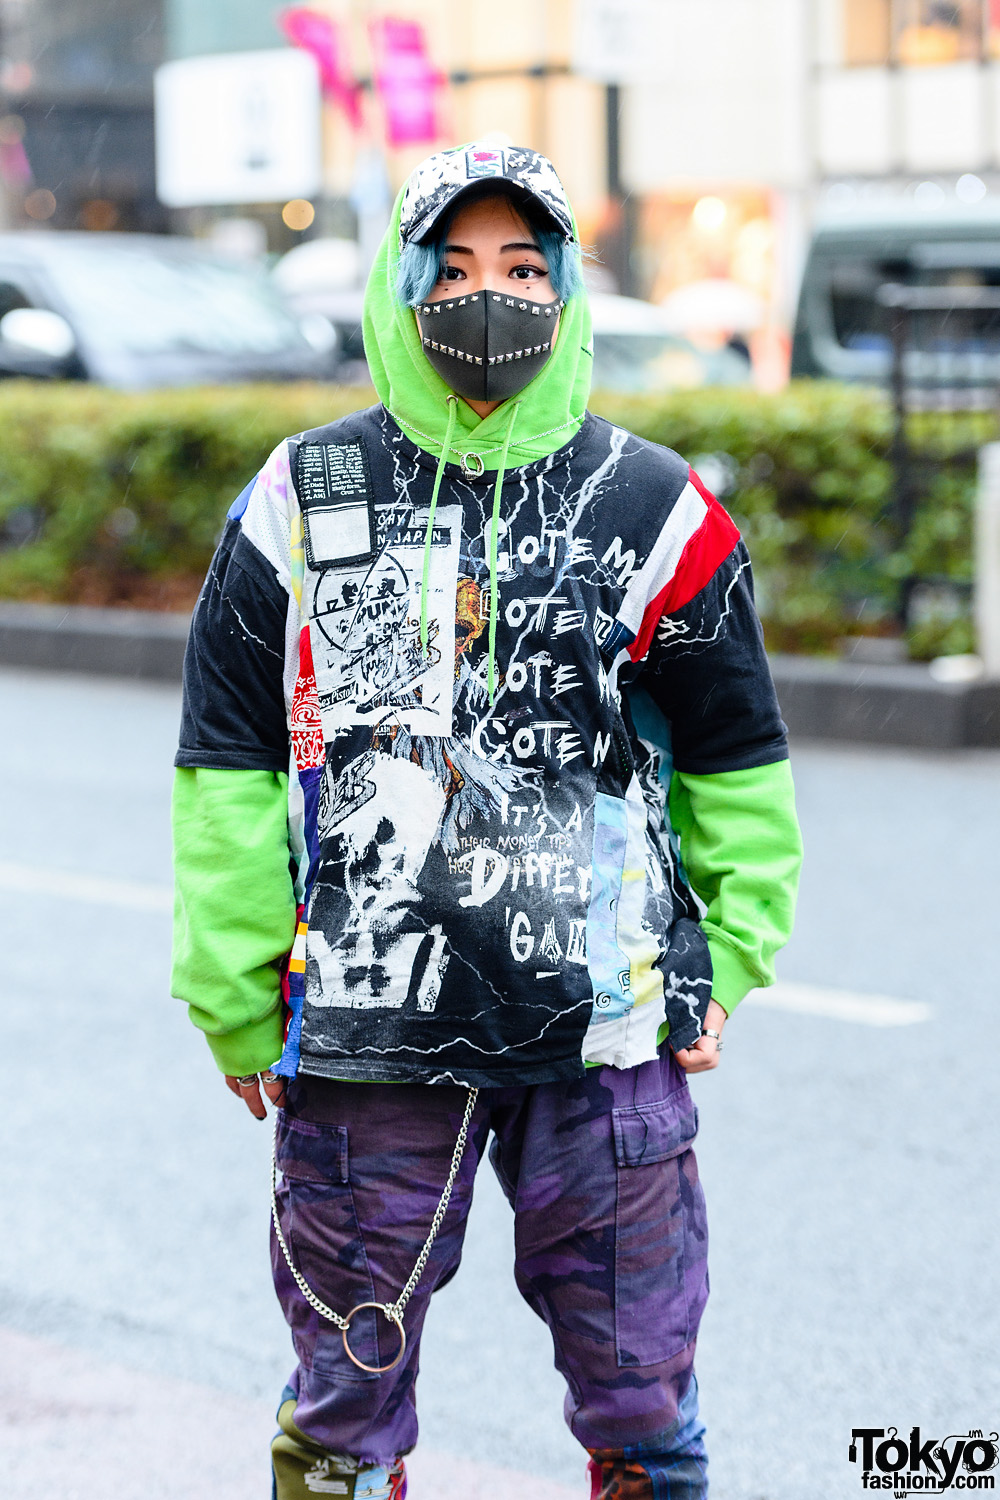 Cote Mer Tokyo Graphic Streetwear Style w/ Studded Face Mask, Graphic ...